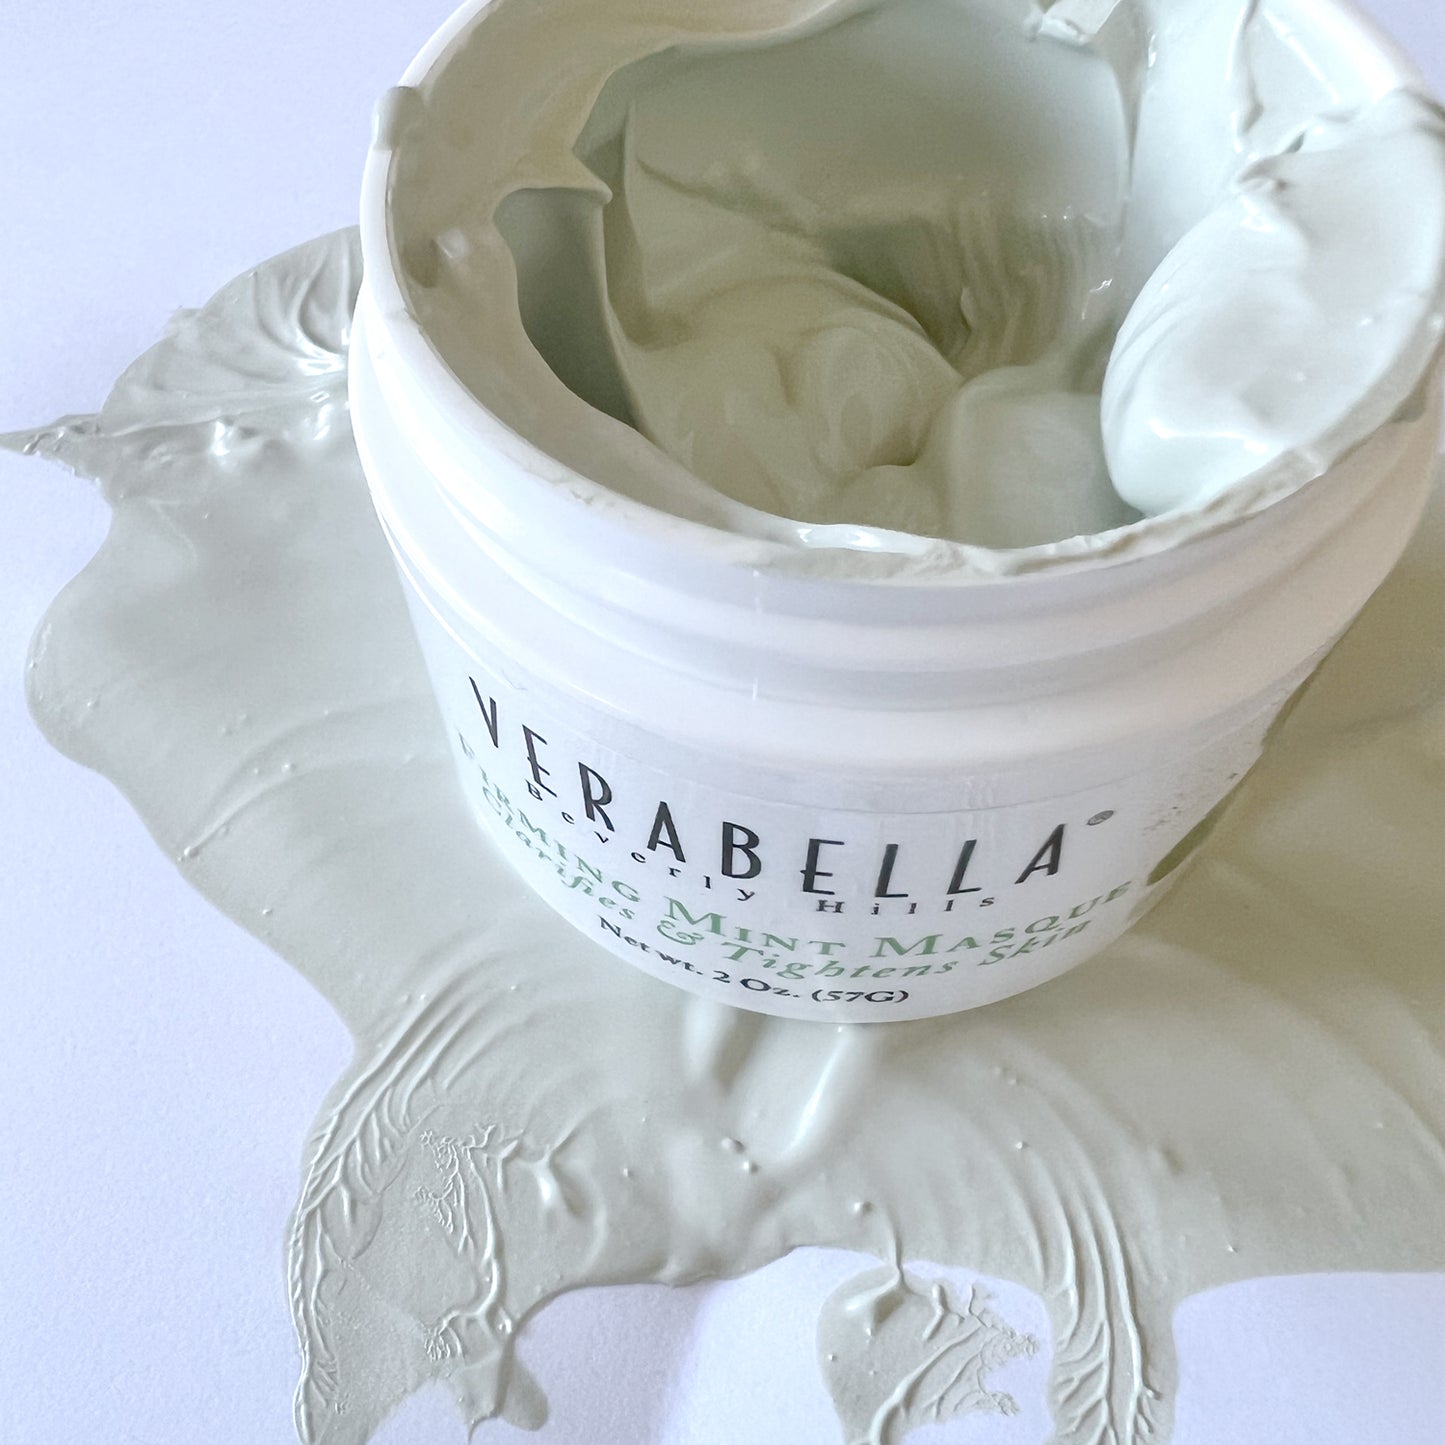 Inside Container - Verabella Firming Mint Masque Mask